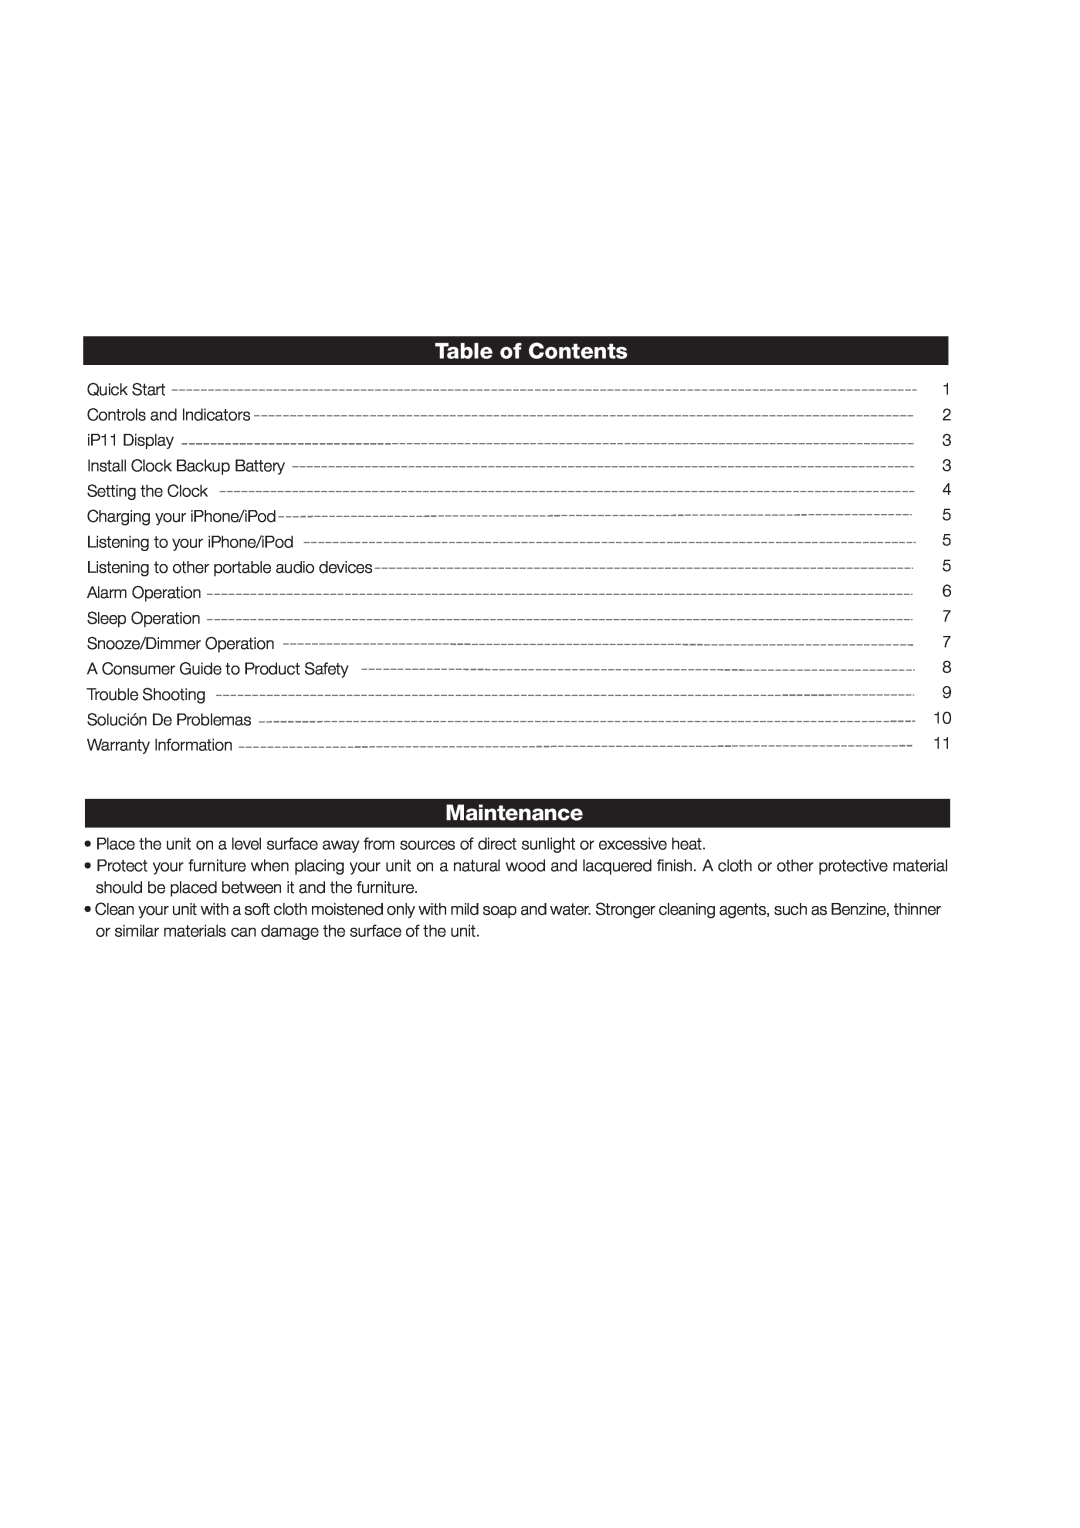 iHome iP11 manual Table of Contents, Maintenance 